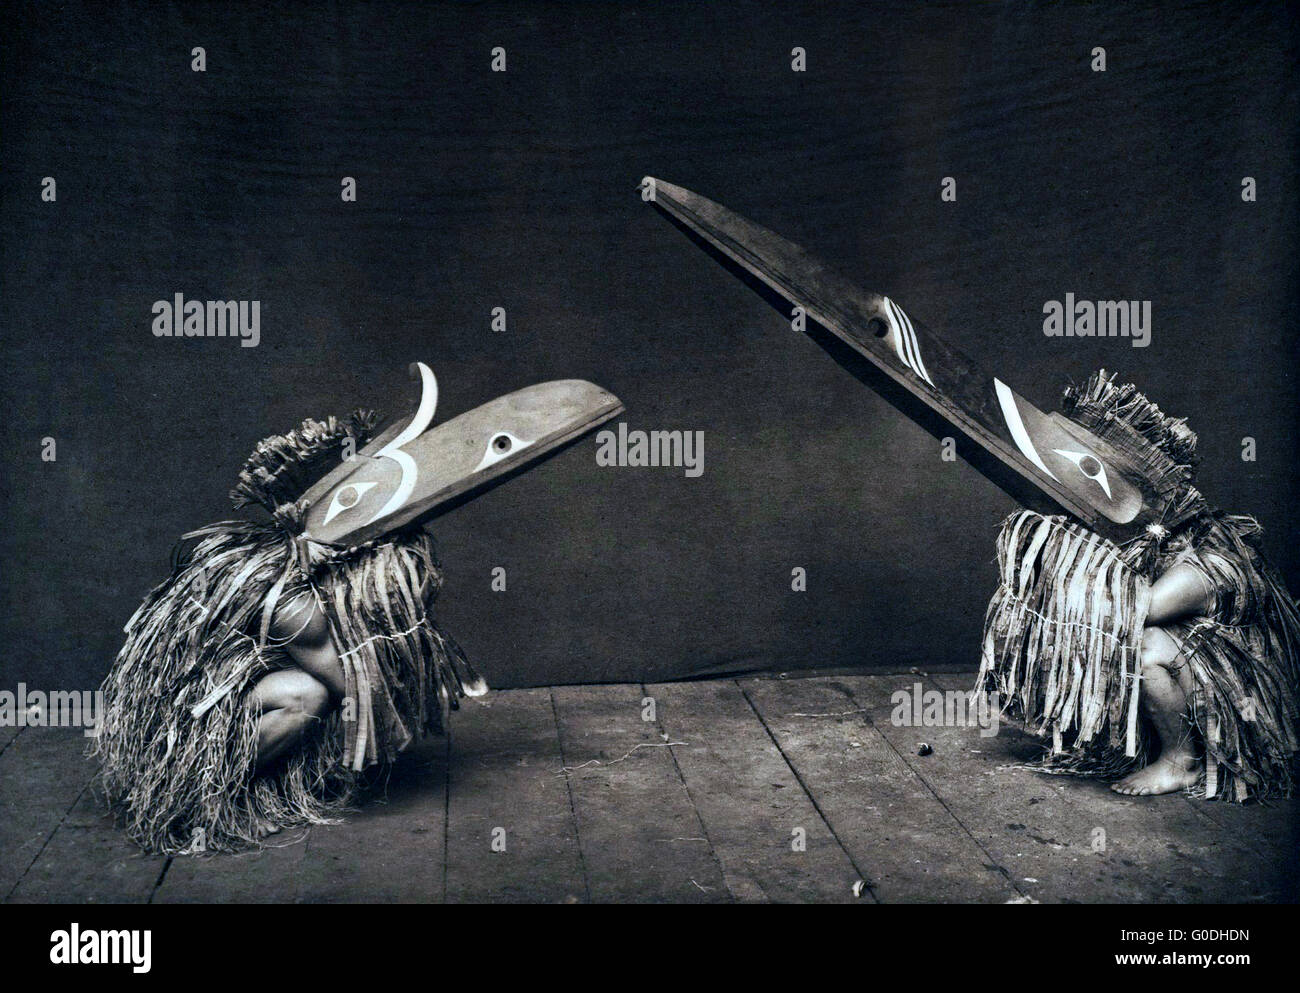 Native American Nakoaktok dancers wearing masks of the mythical Kotsuis birds during a traditional potlatch 1914 in British Columbia, Canada. The costumes represent Kotsuis and Hohhuq, servants of the man-eating monster Pahpaqalanohsiwi. The mandibles of these tremendous wooden masks are controlled by strings. Stock Photo